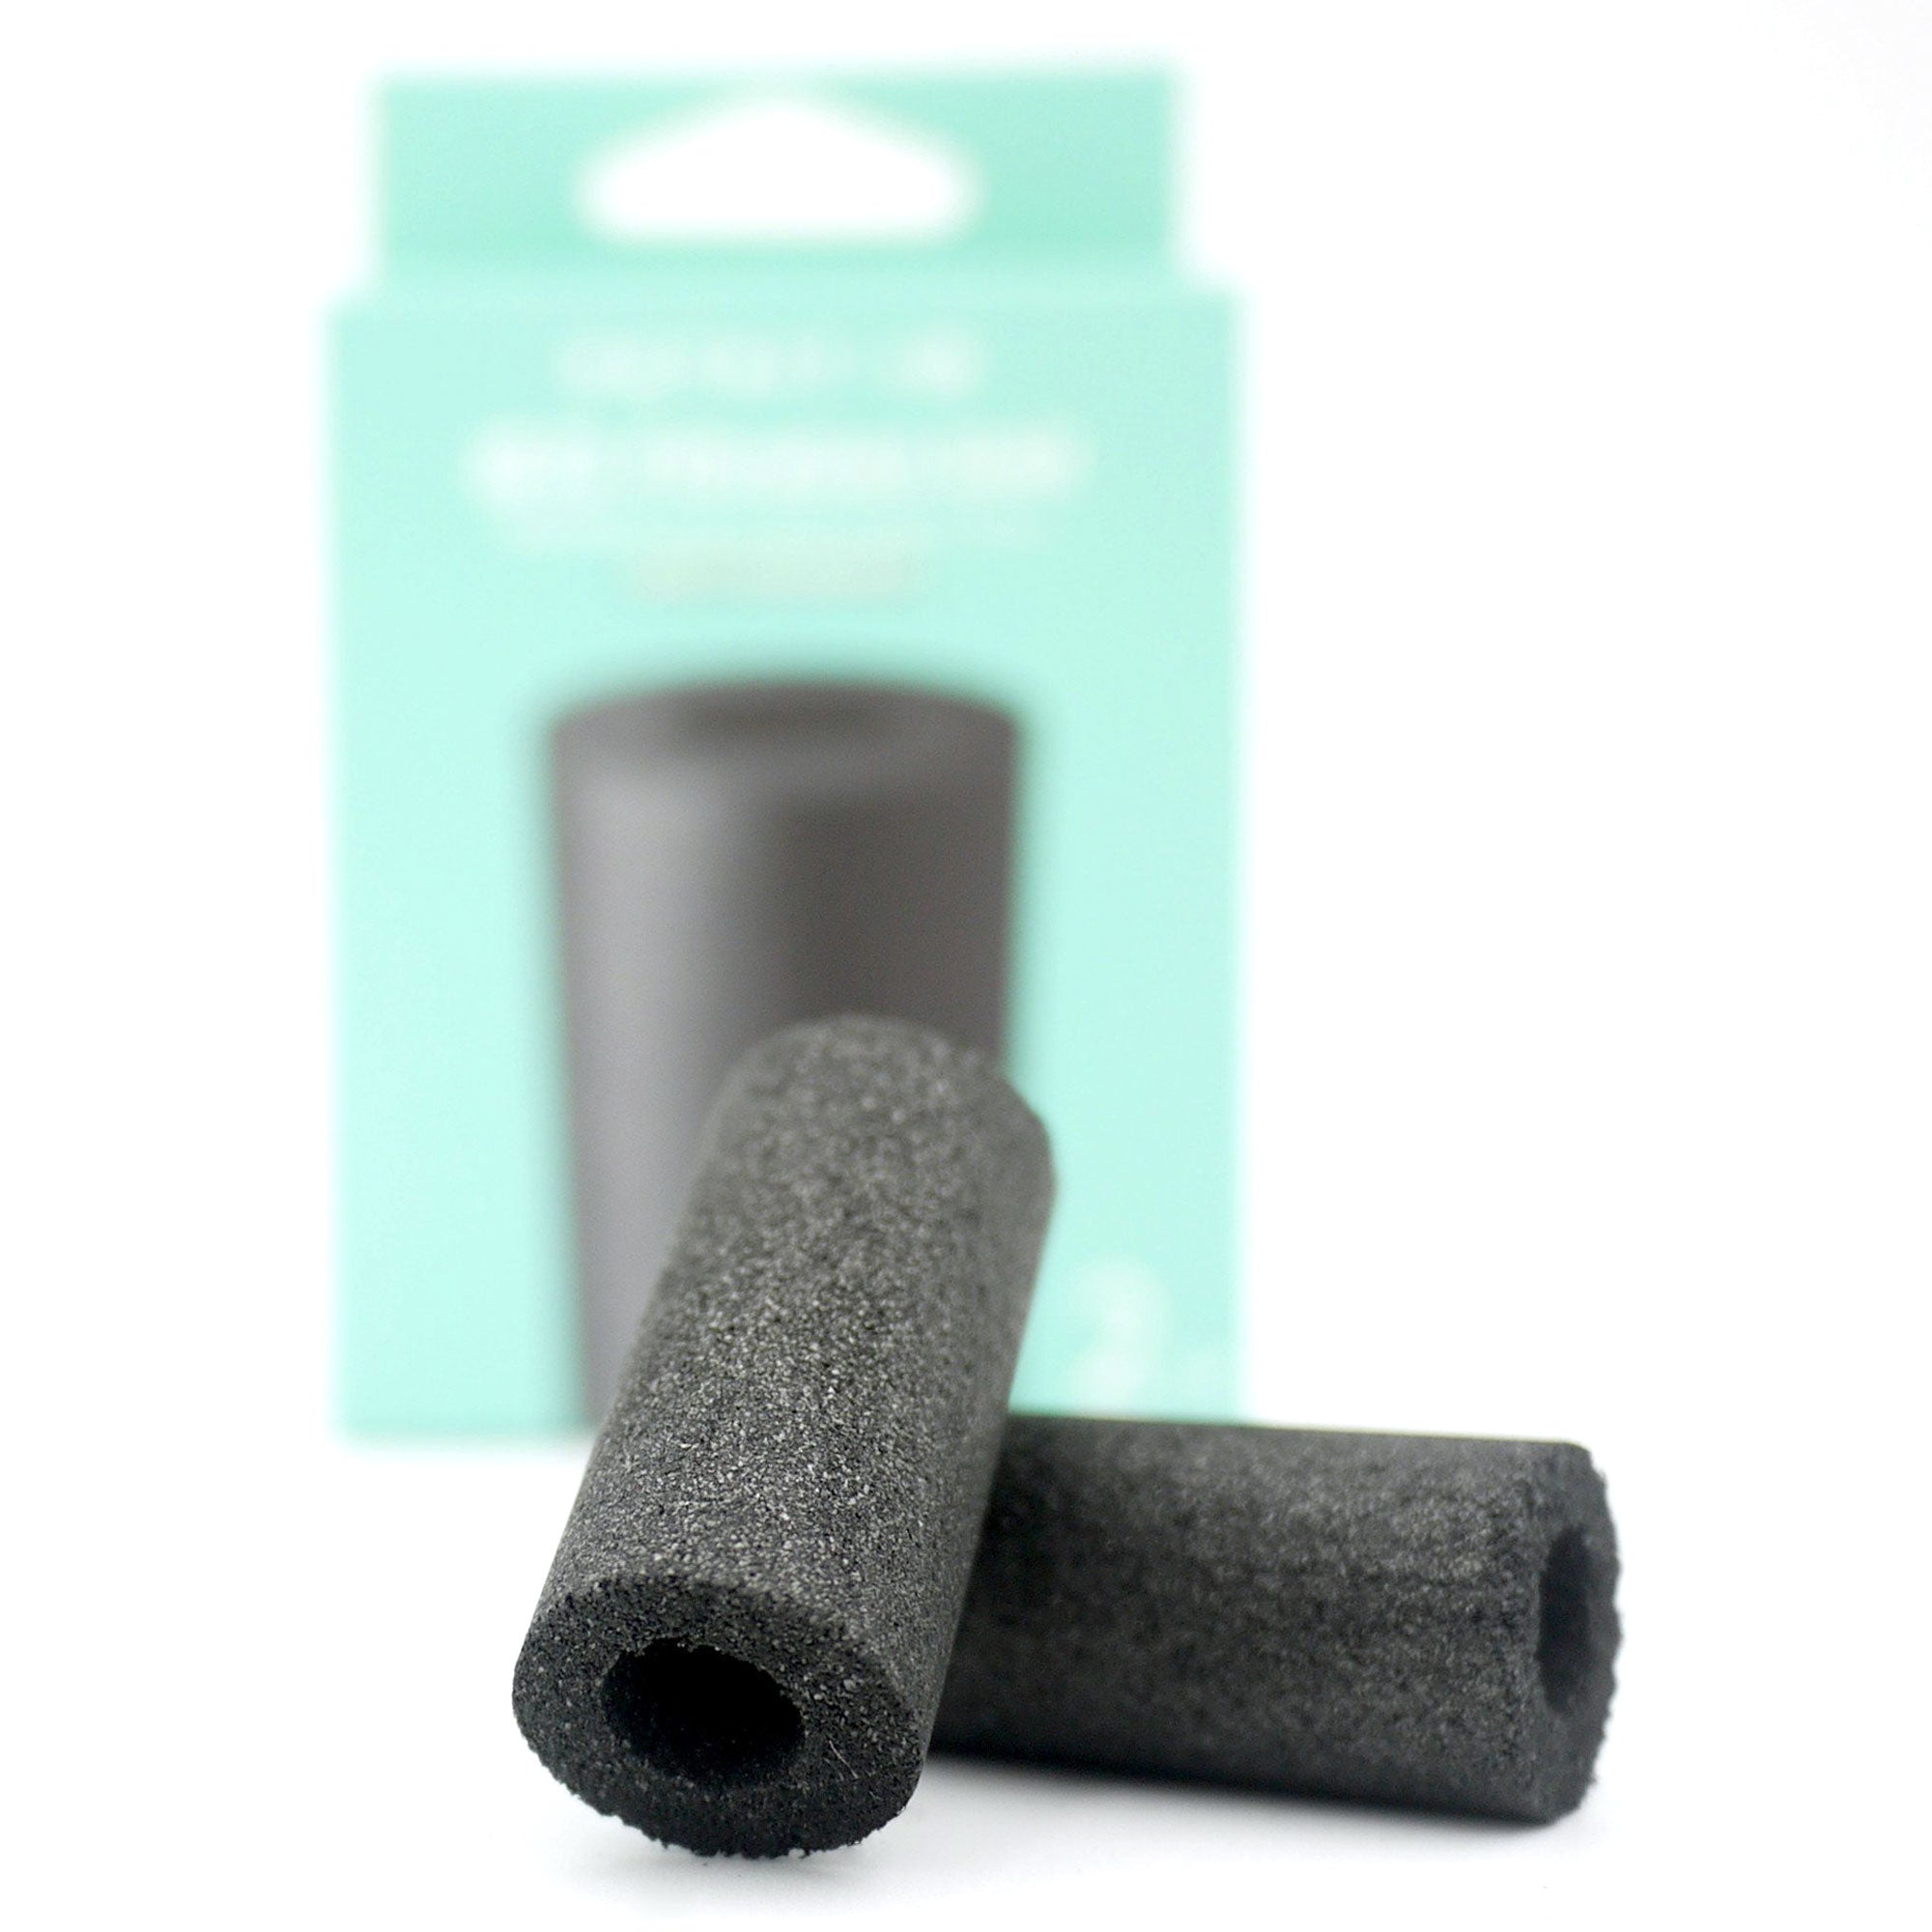 PETKIT Travel 2 Pack Replacement Filters - Black